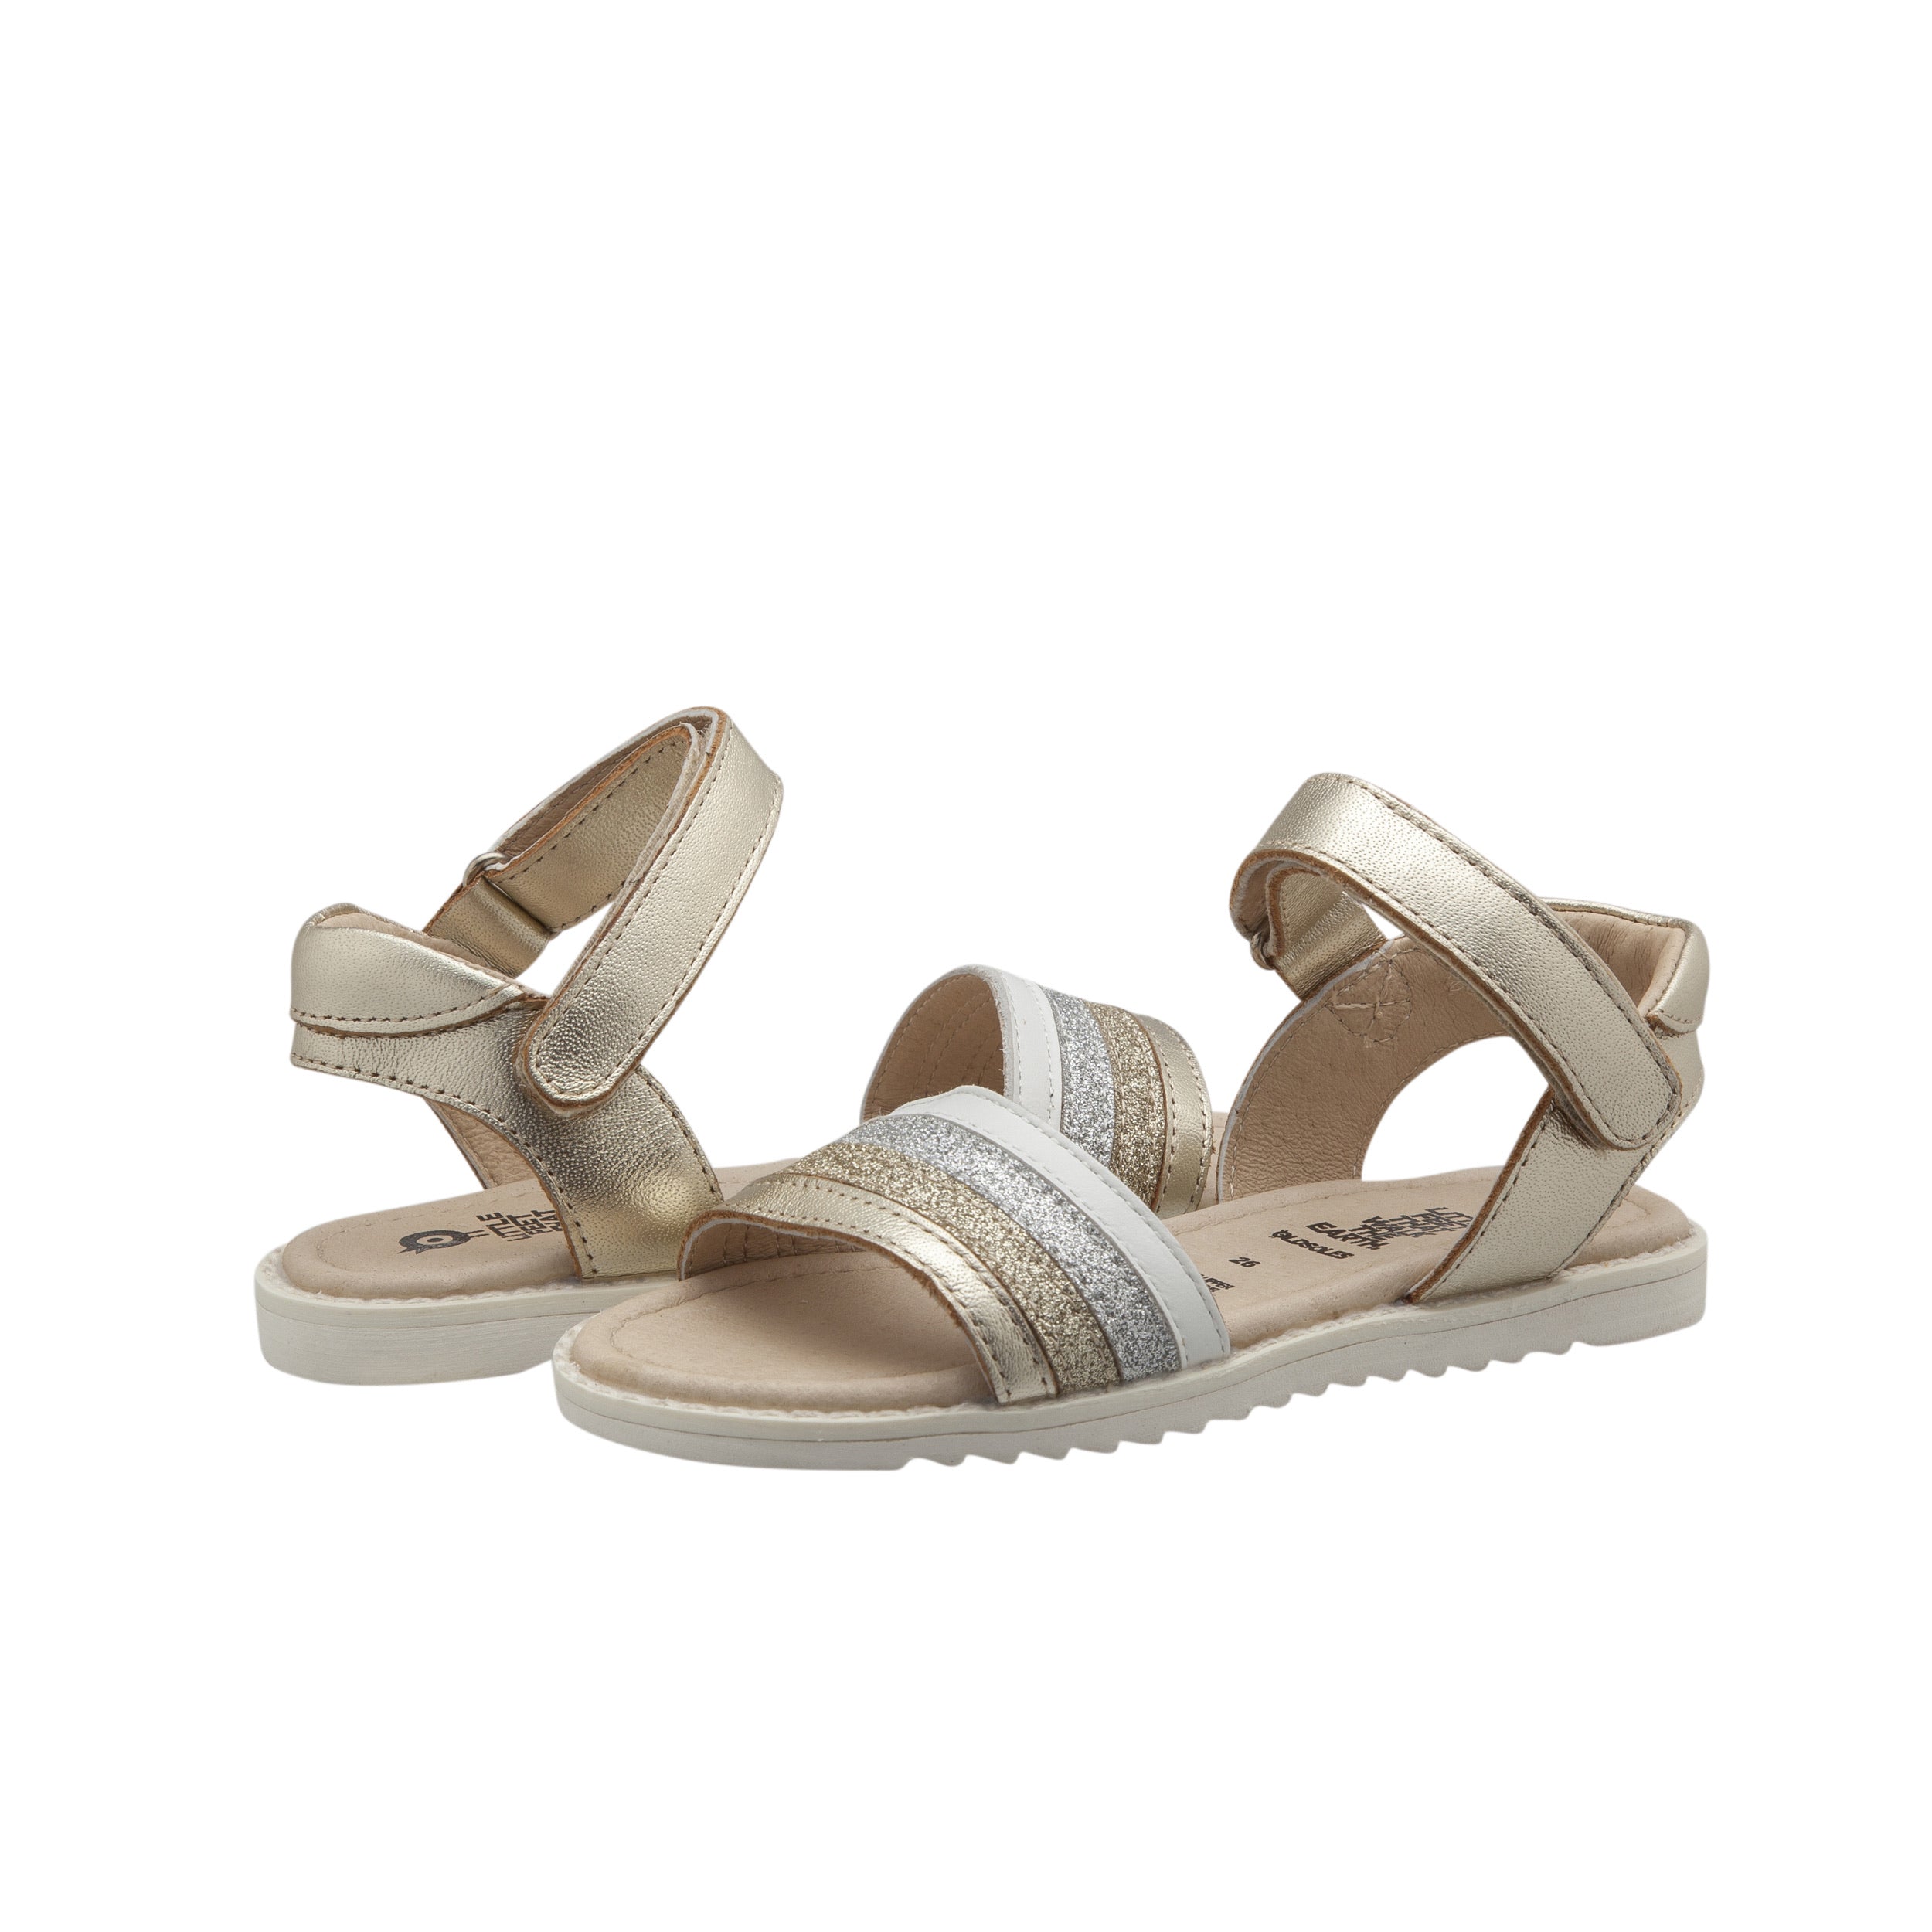 Girls Sandals. Old Soles. Colour Pop Silver Sandals. shop online or in store at Sticky Fingers Children's Boutique, Niddrie, Melbourne. 